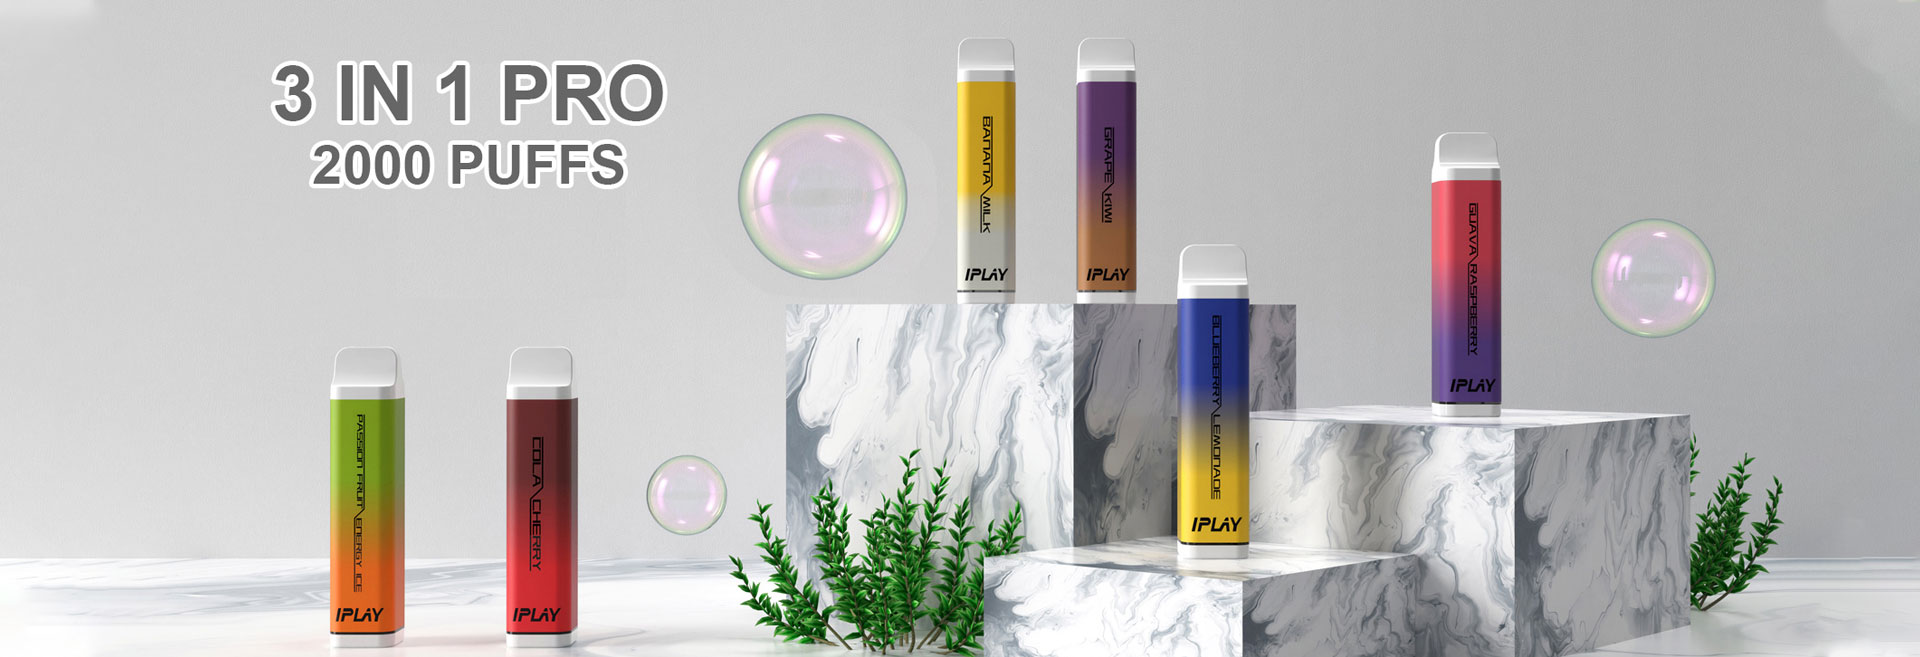 IPLAY-3-IN-1-PRO-DISPOSABLE-POD